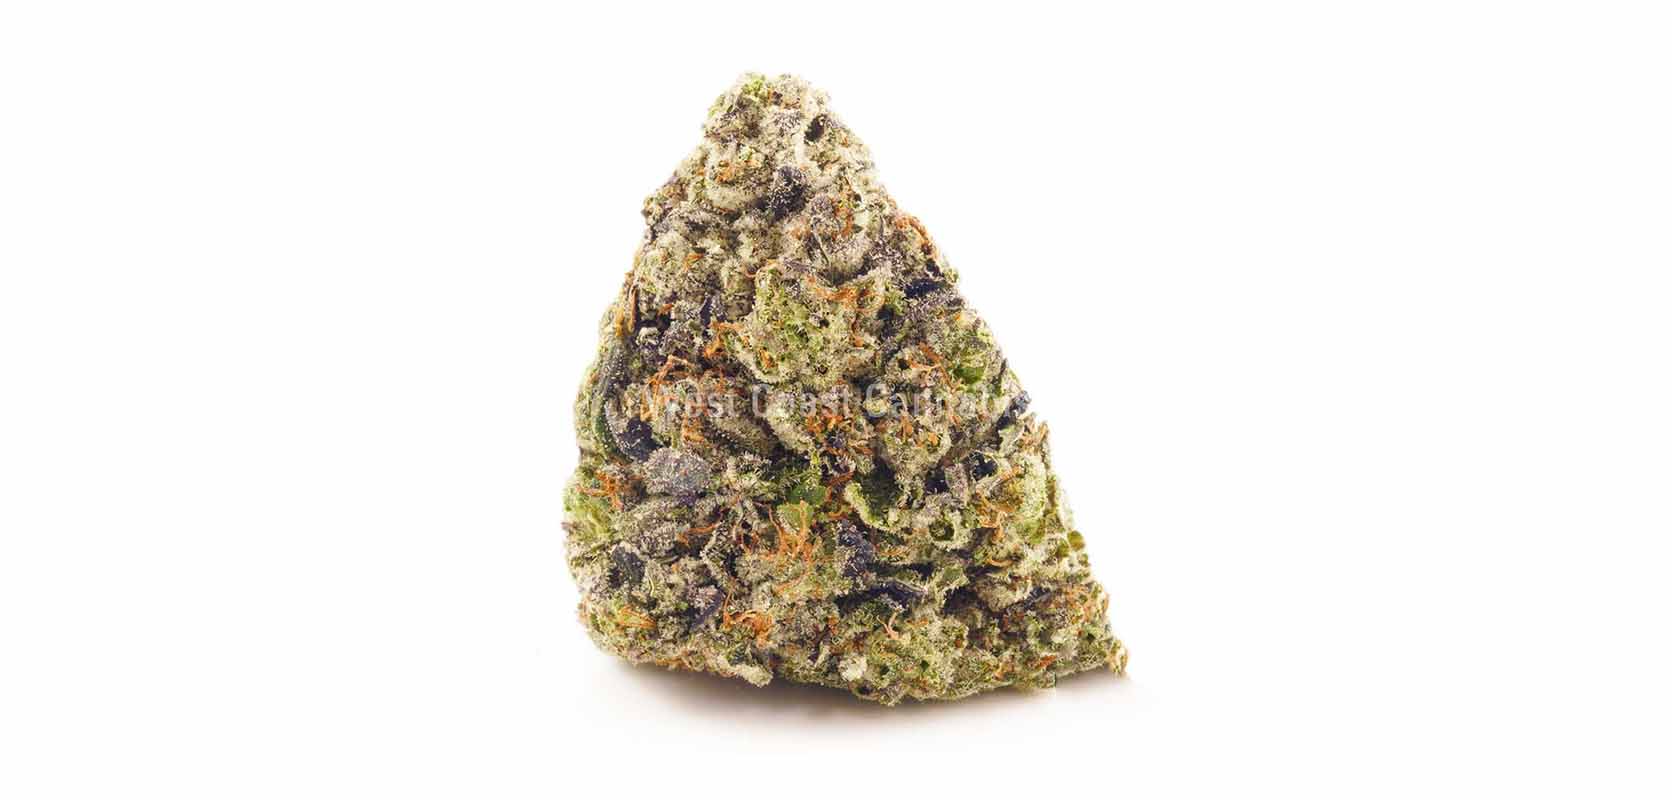 Purple Gasoline Sativa strains for sale online in Canada at West Coast Cannabis online dispensary Canada for mil order marijuana and cheapweed value buds.